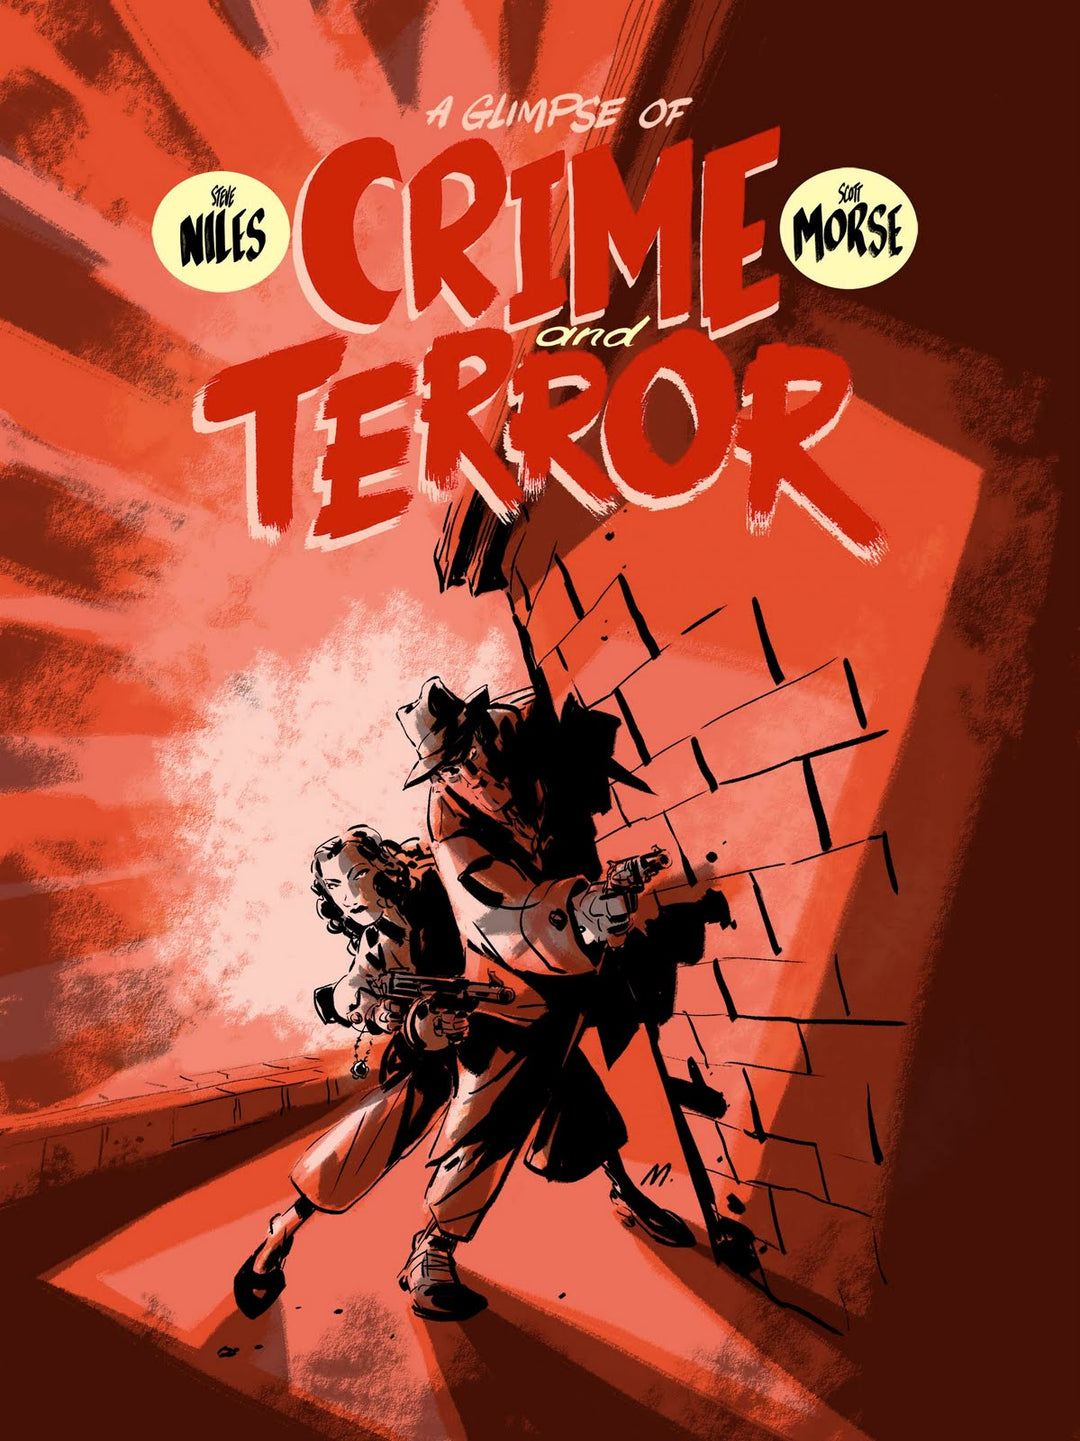 A Glimpse Of Crime And Terror (Signed)